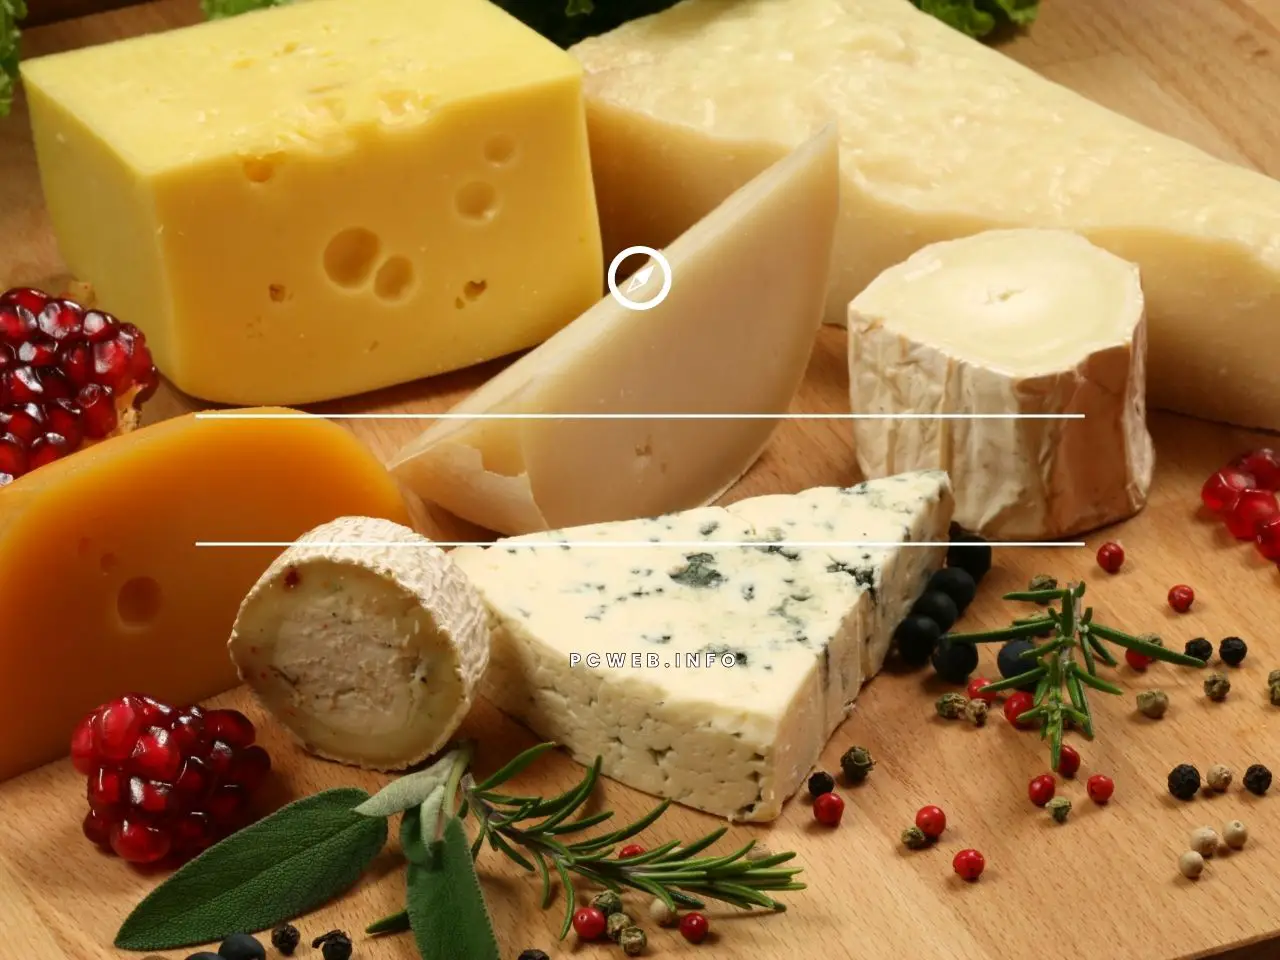 How do you know which cheeses are safe and which are not?